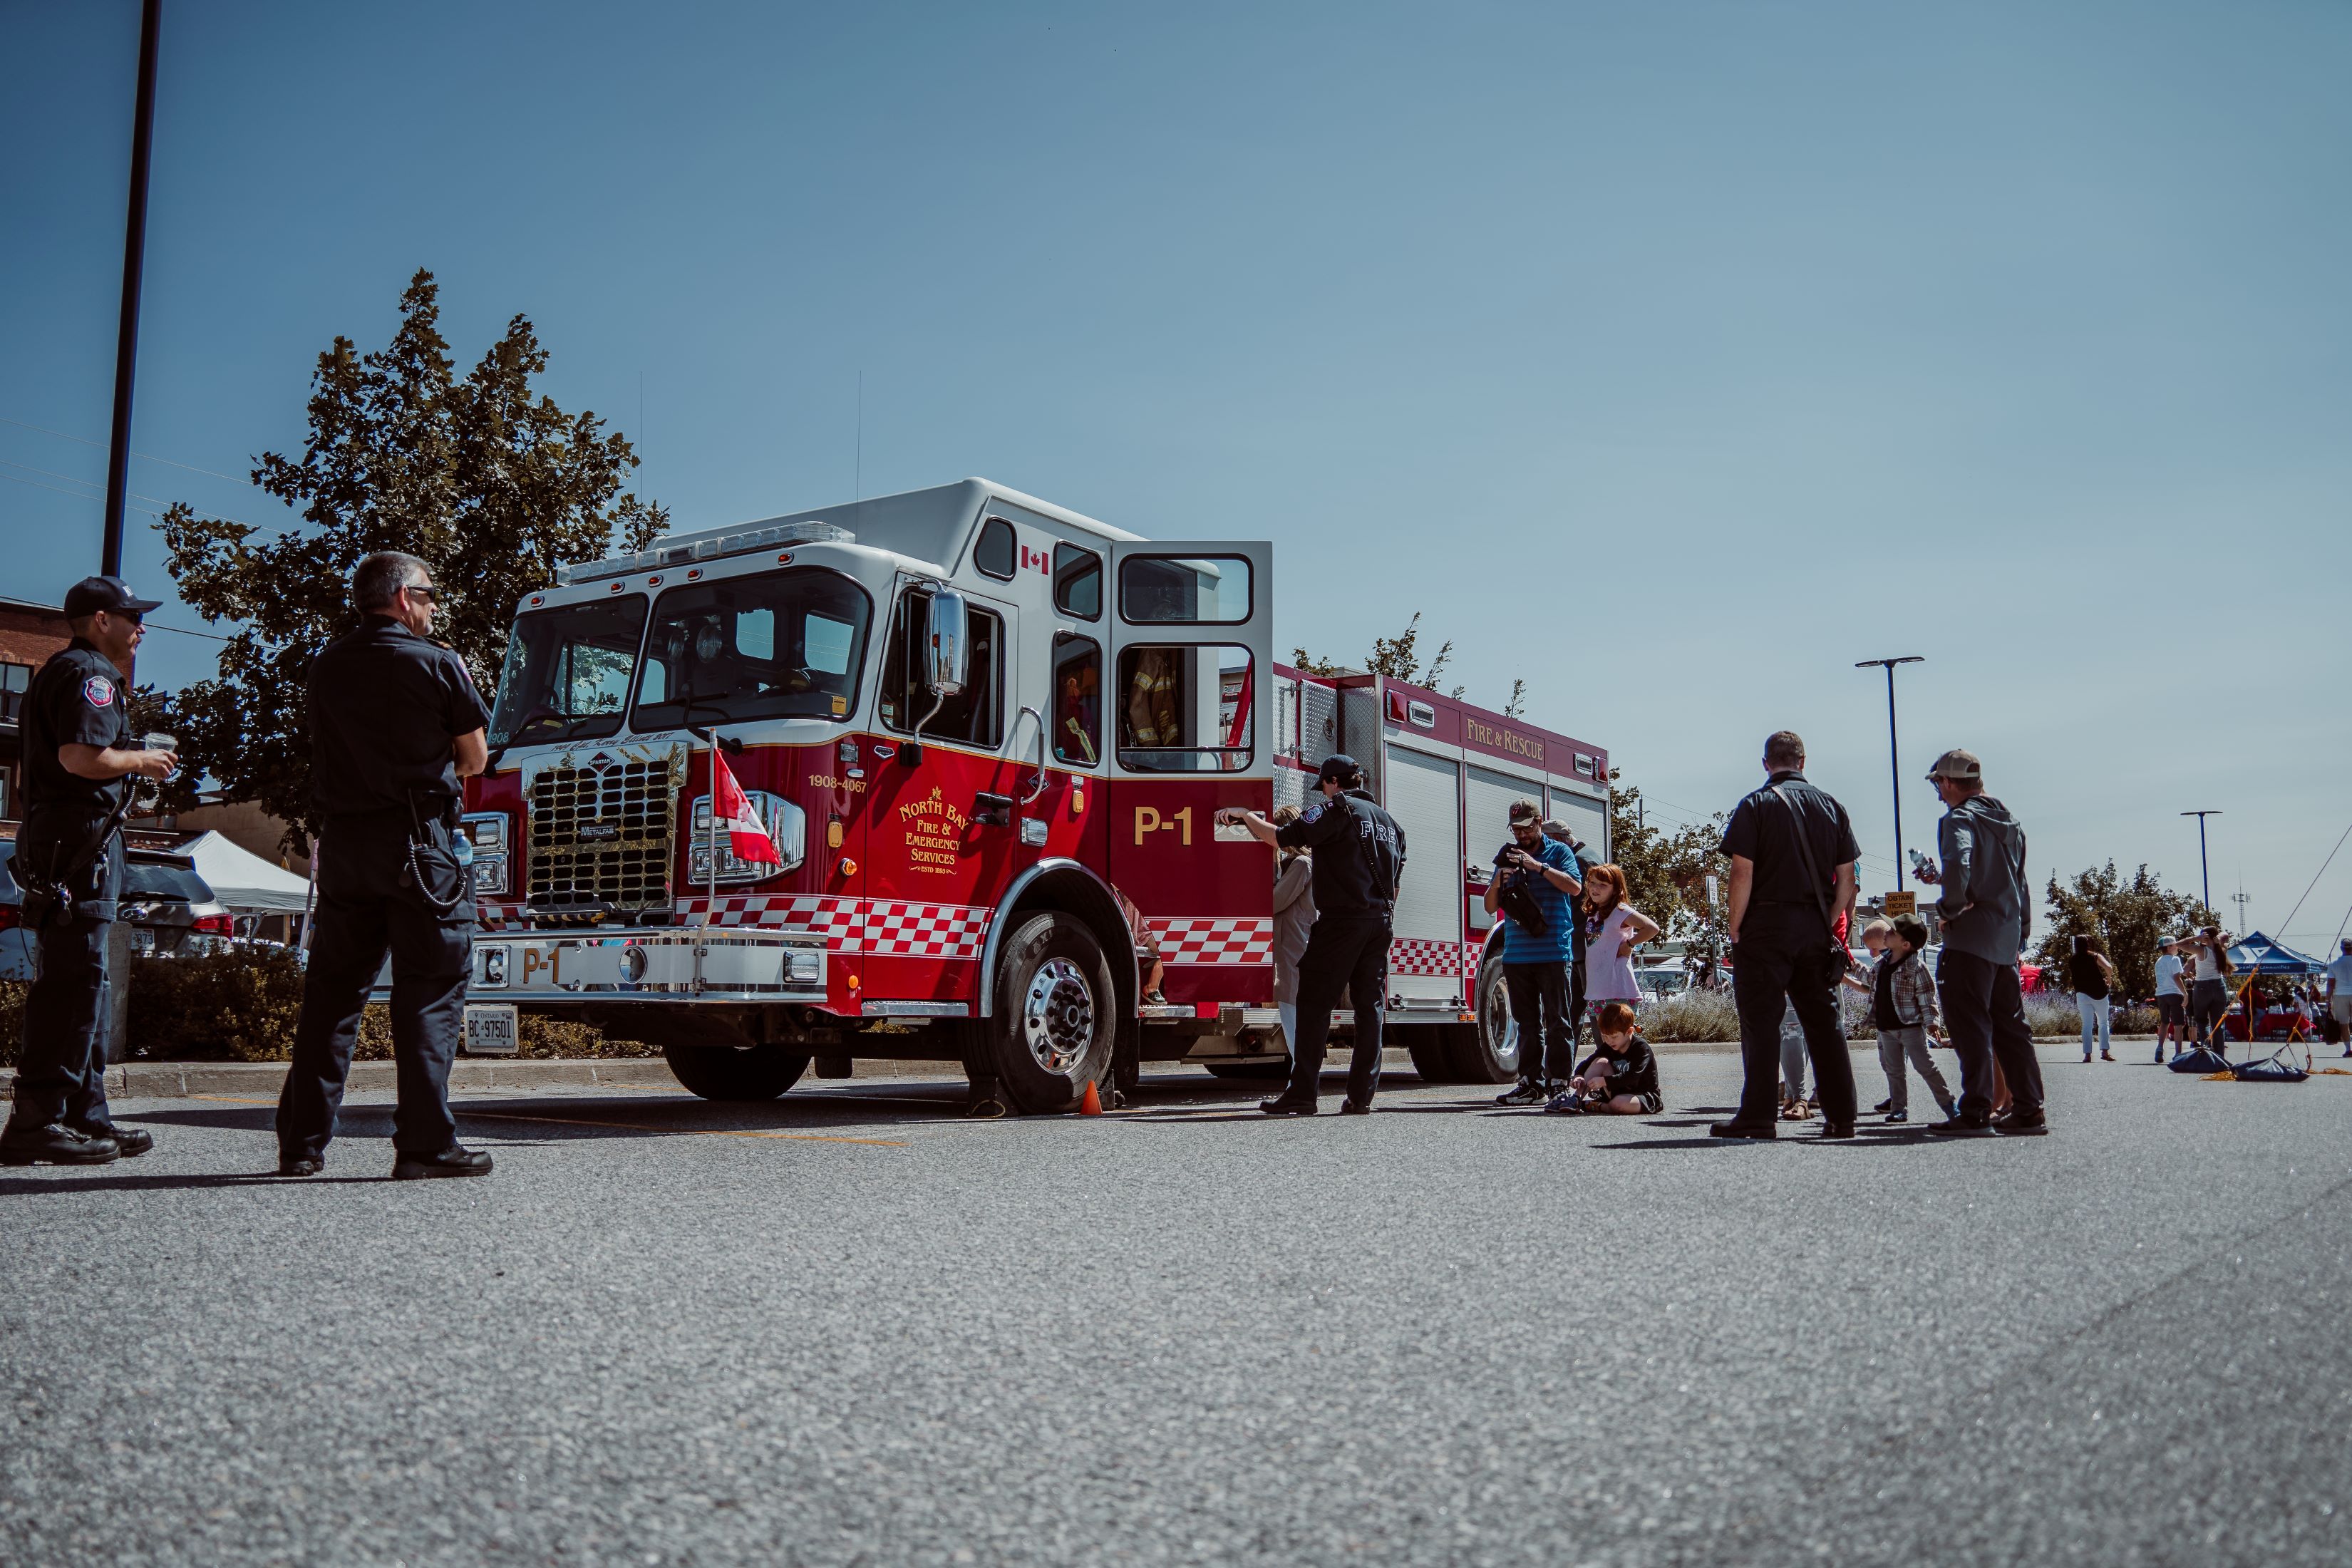 Fire Engine tours by North Bay Fire & Emergency Services - Photo by McCrea Productions